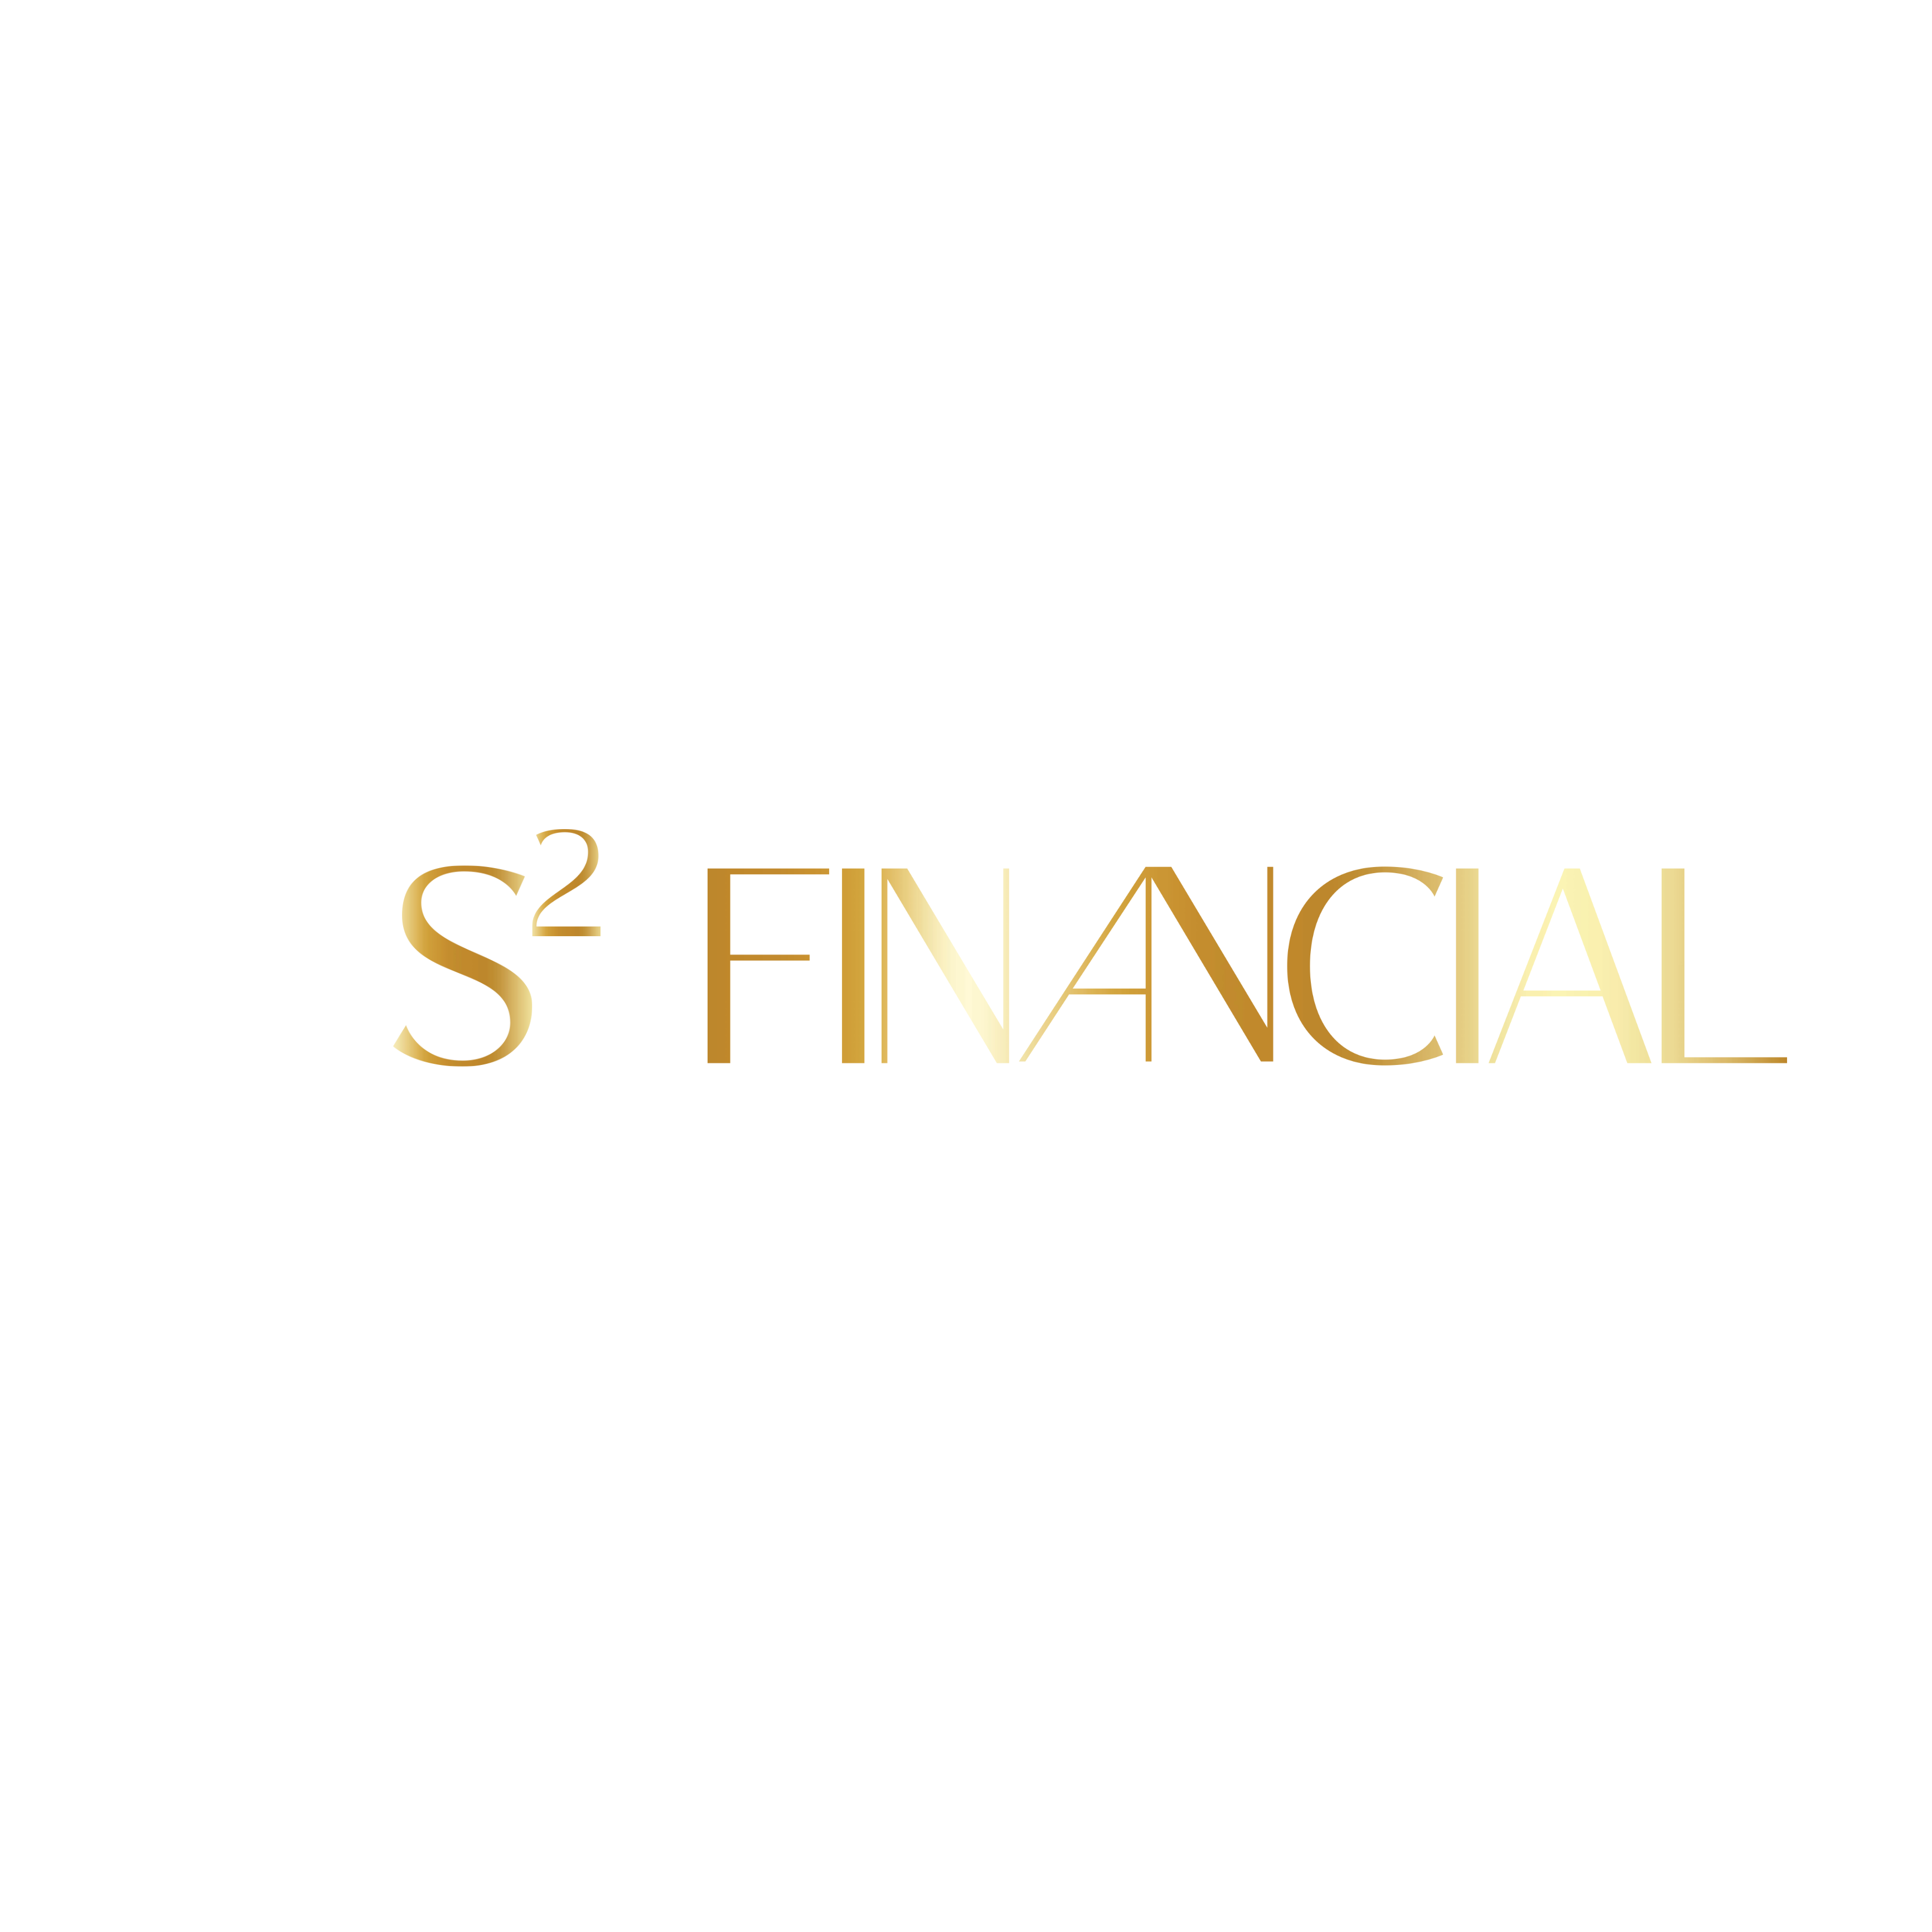 S Squared Financial Service